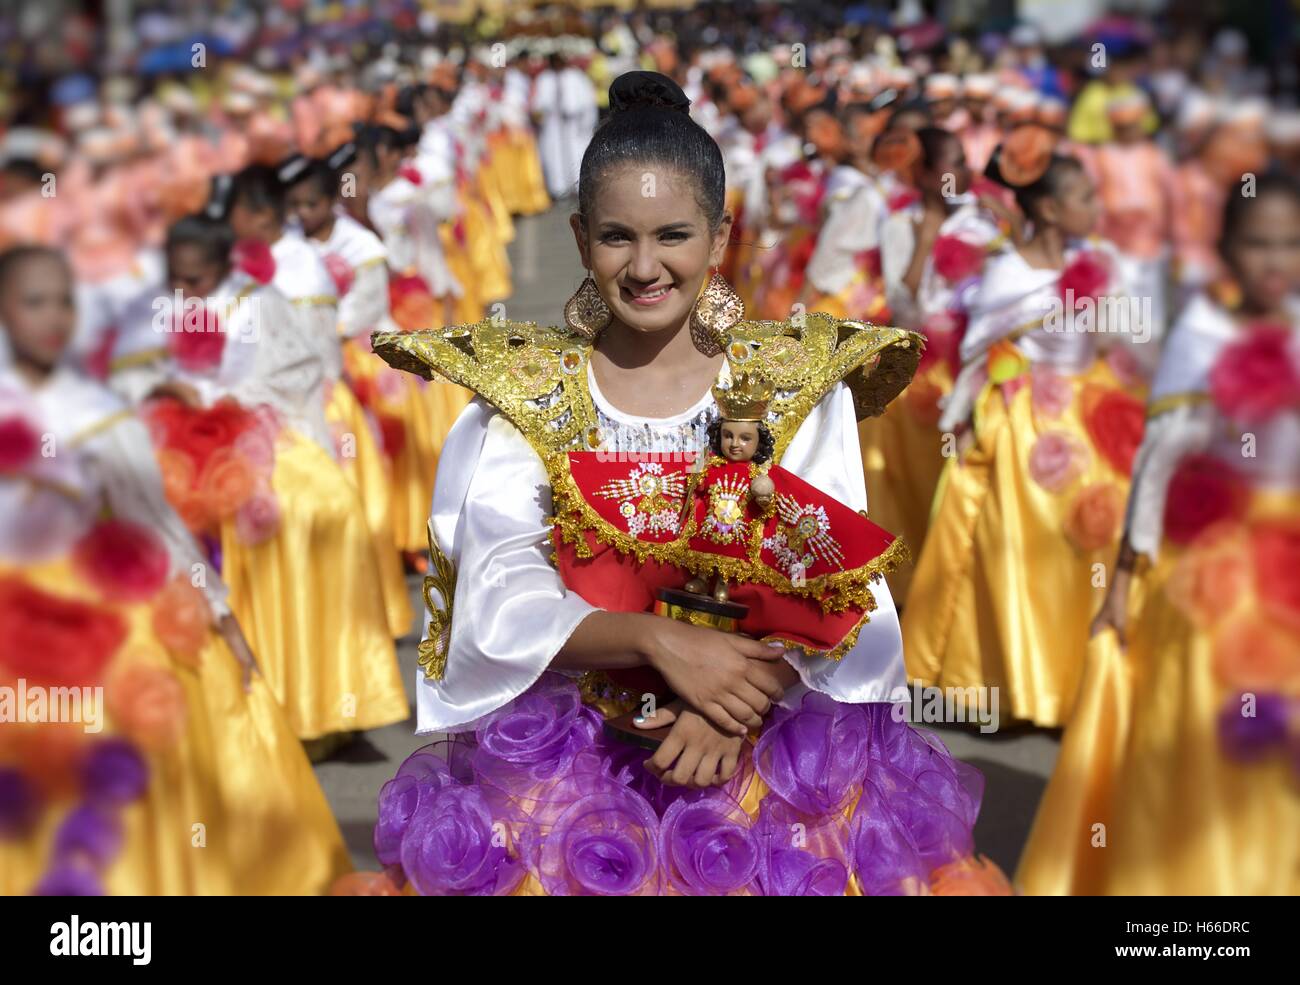 The Sinulog-Santo Niño Festival is an annual cultural and religious festival held in Cebu City. Street dancers. Stock Photo